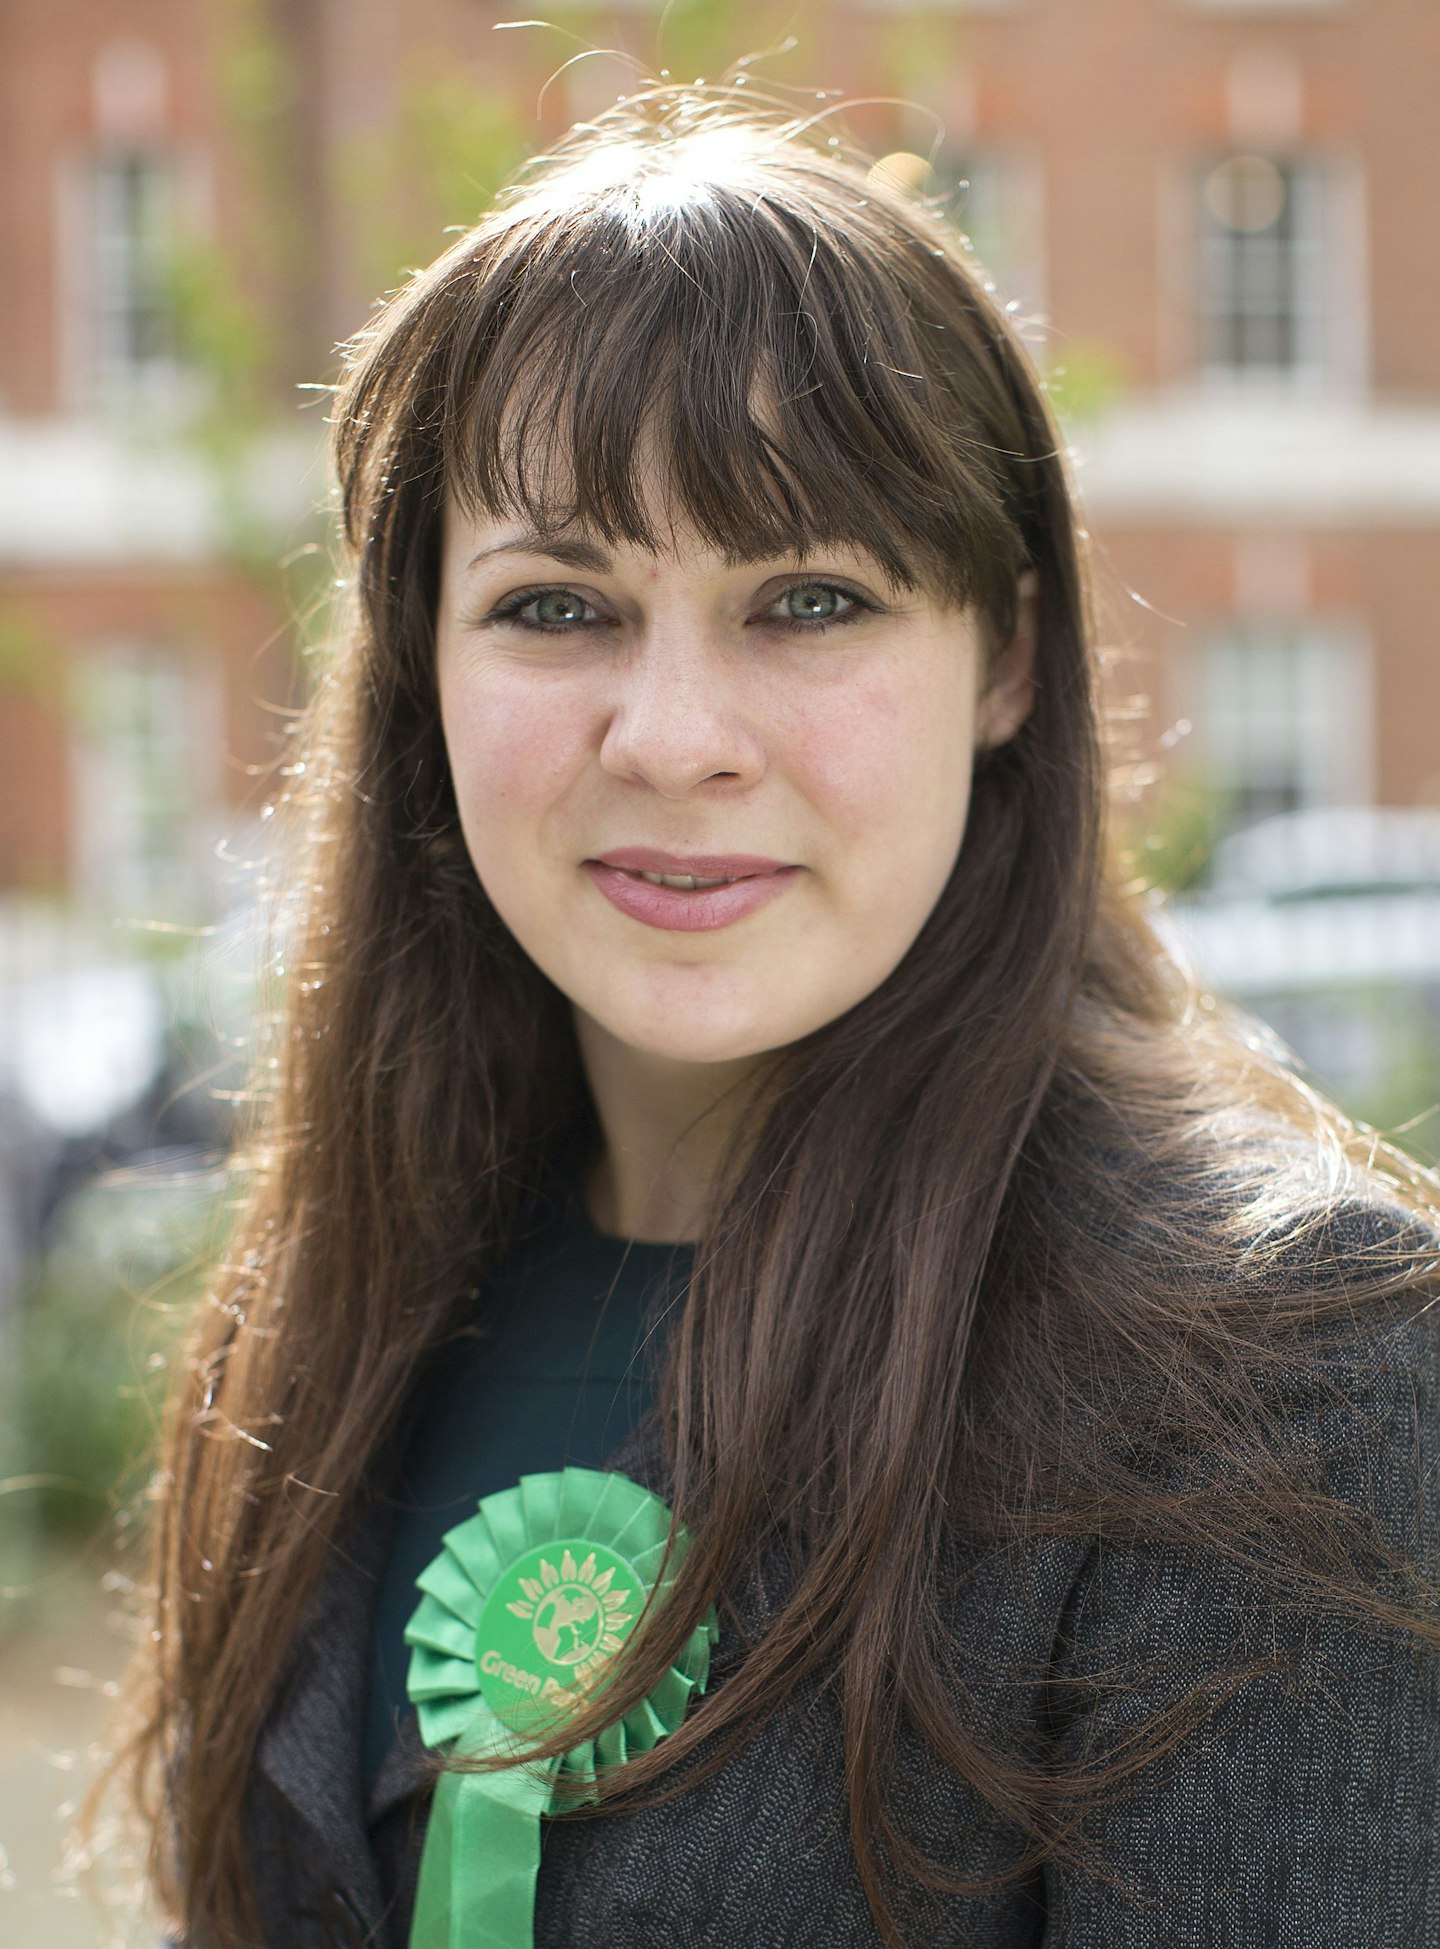 Amelia Womack of the Green Party